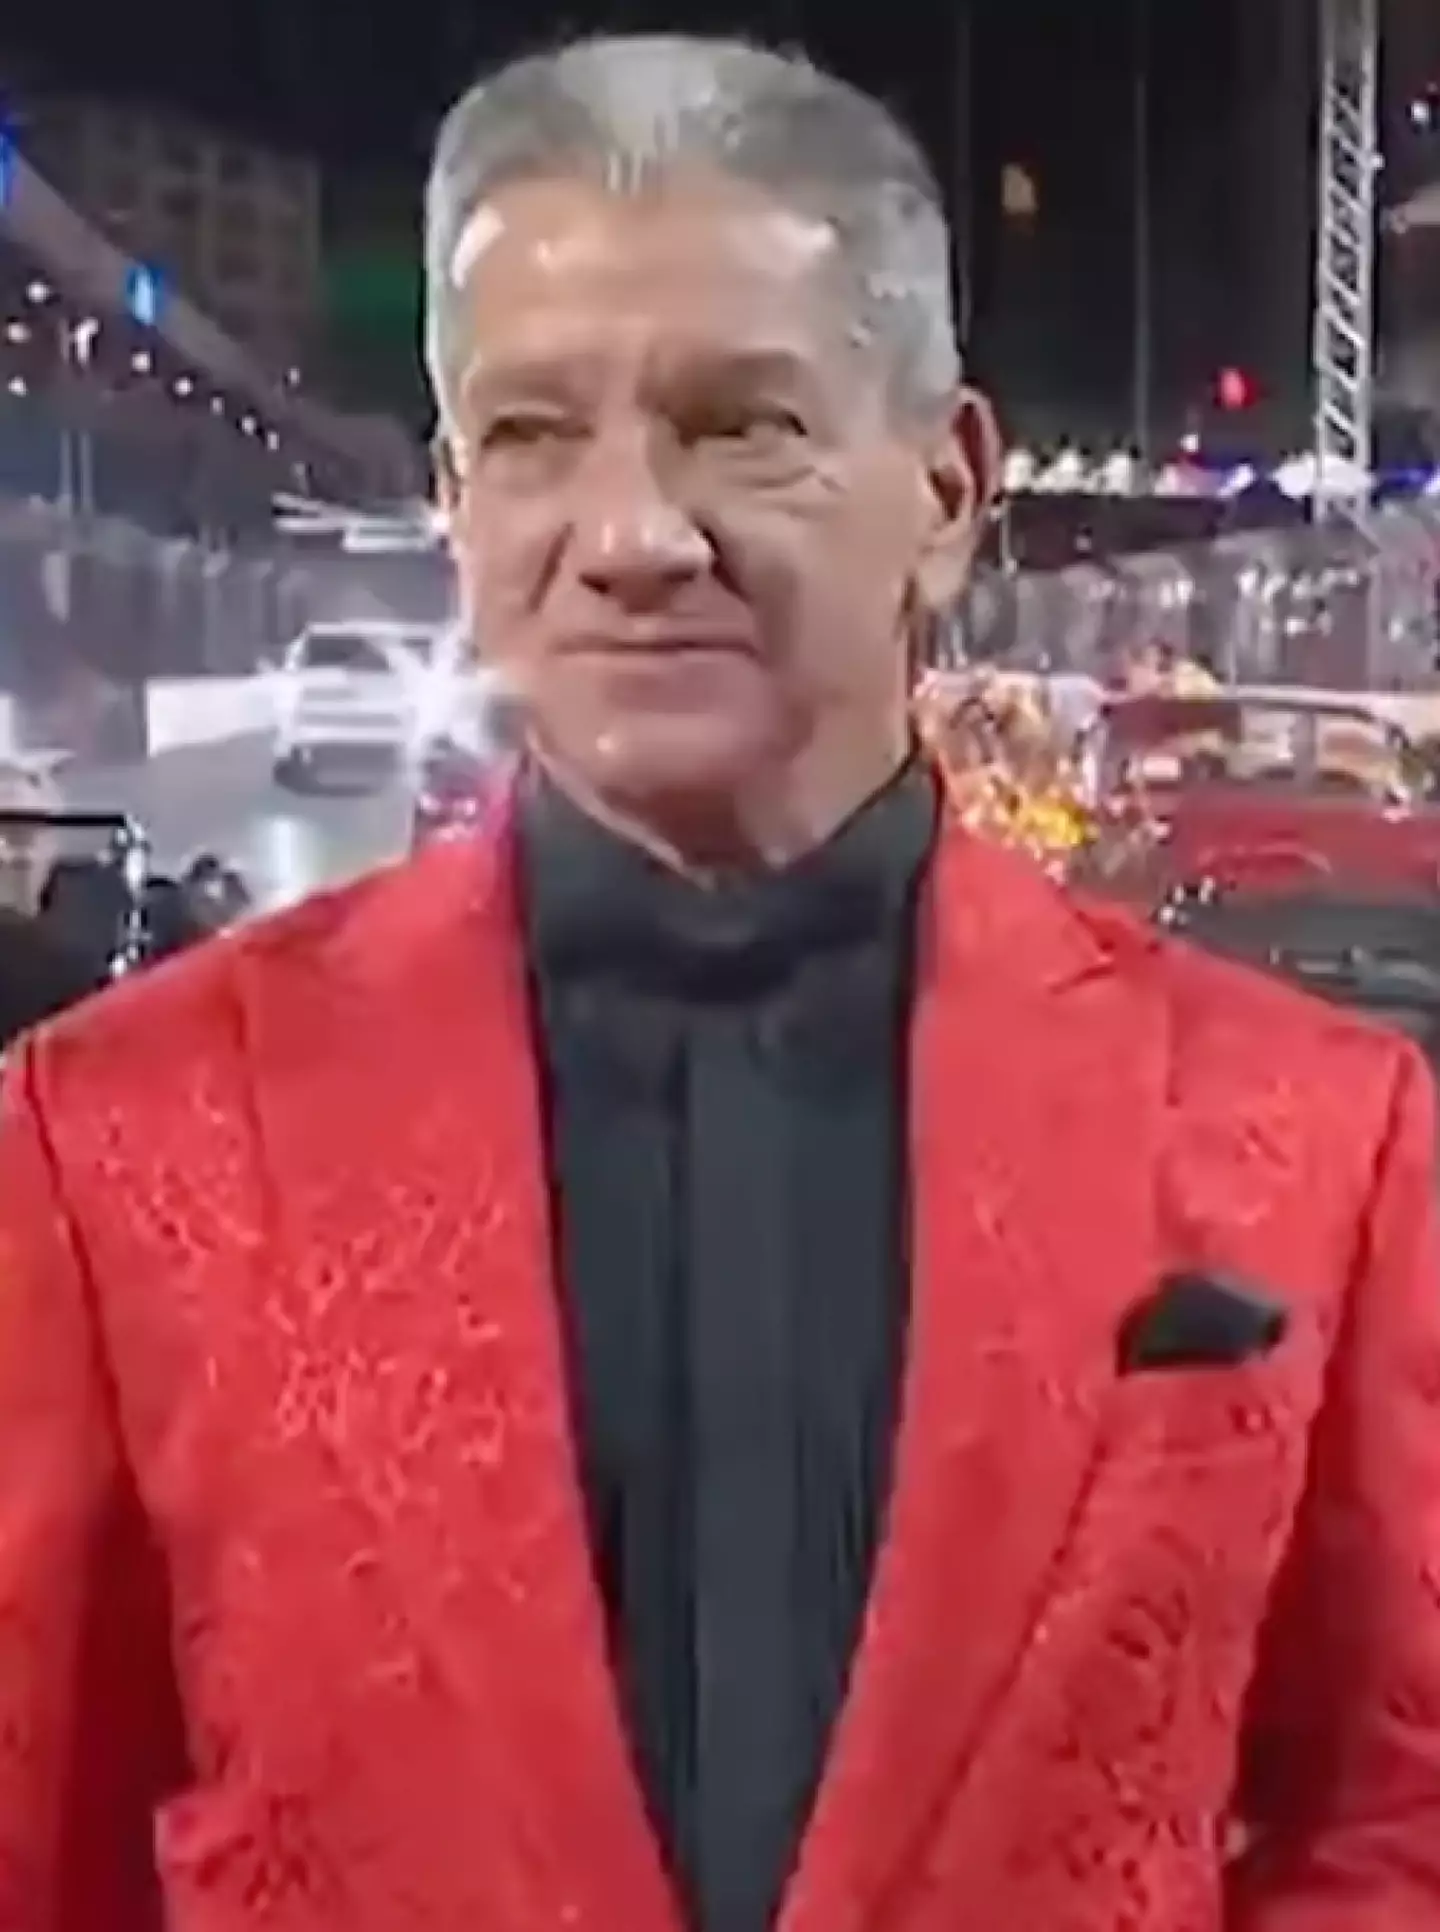 Bruce Buffer's announcement was certainly extra.